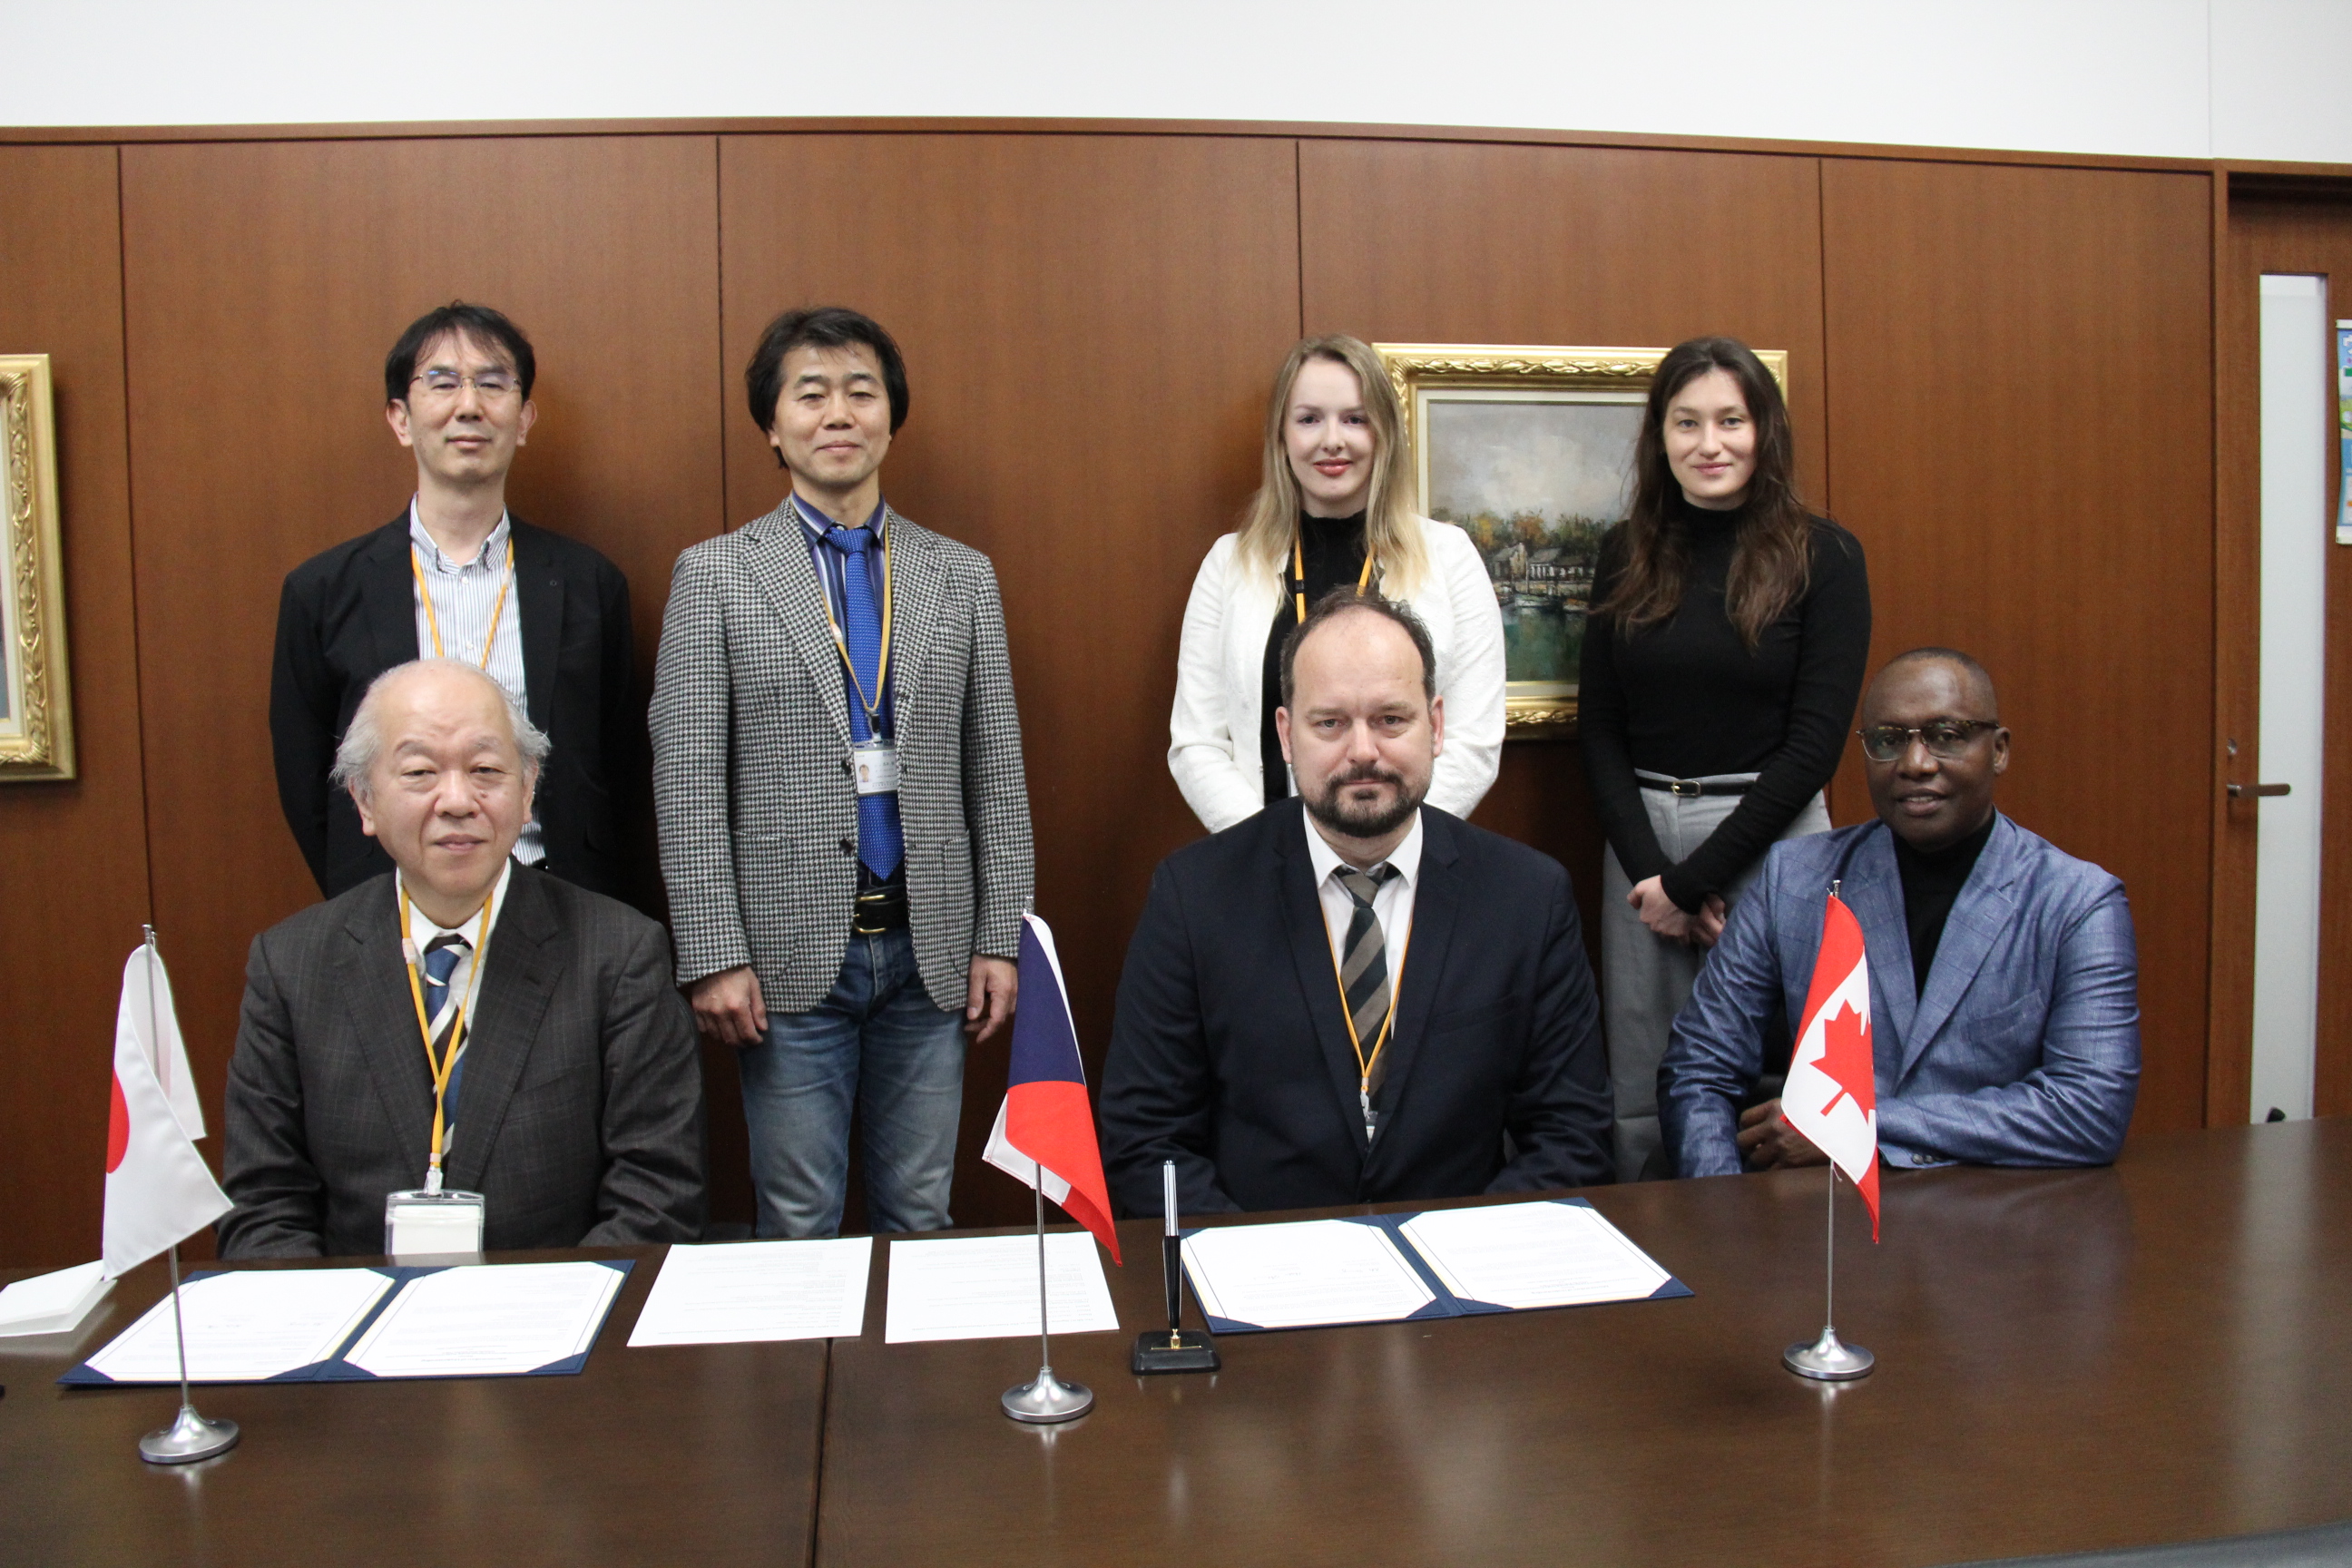 Commemorative photo of members of Czech University of Life sciences, Prague, Ministry of Forest, British Colombia, Canada, and ISM